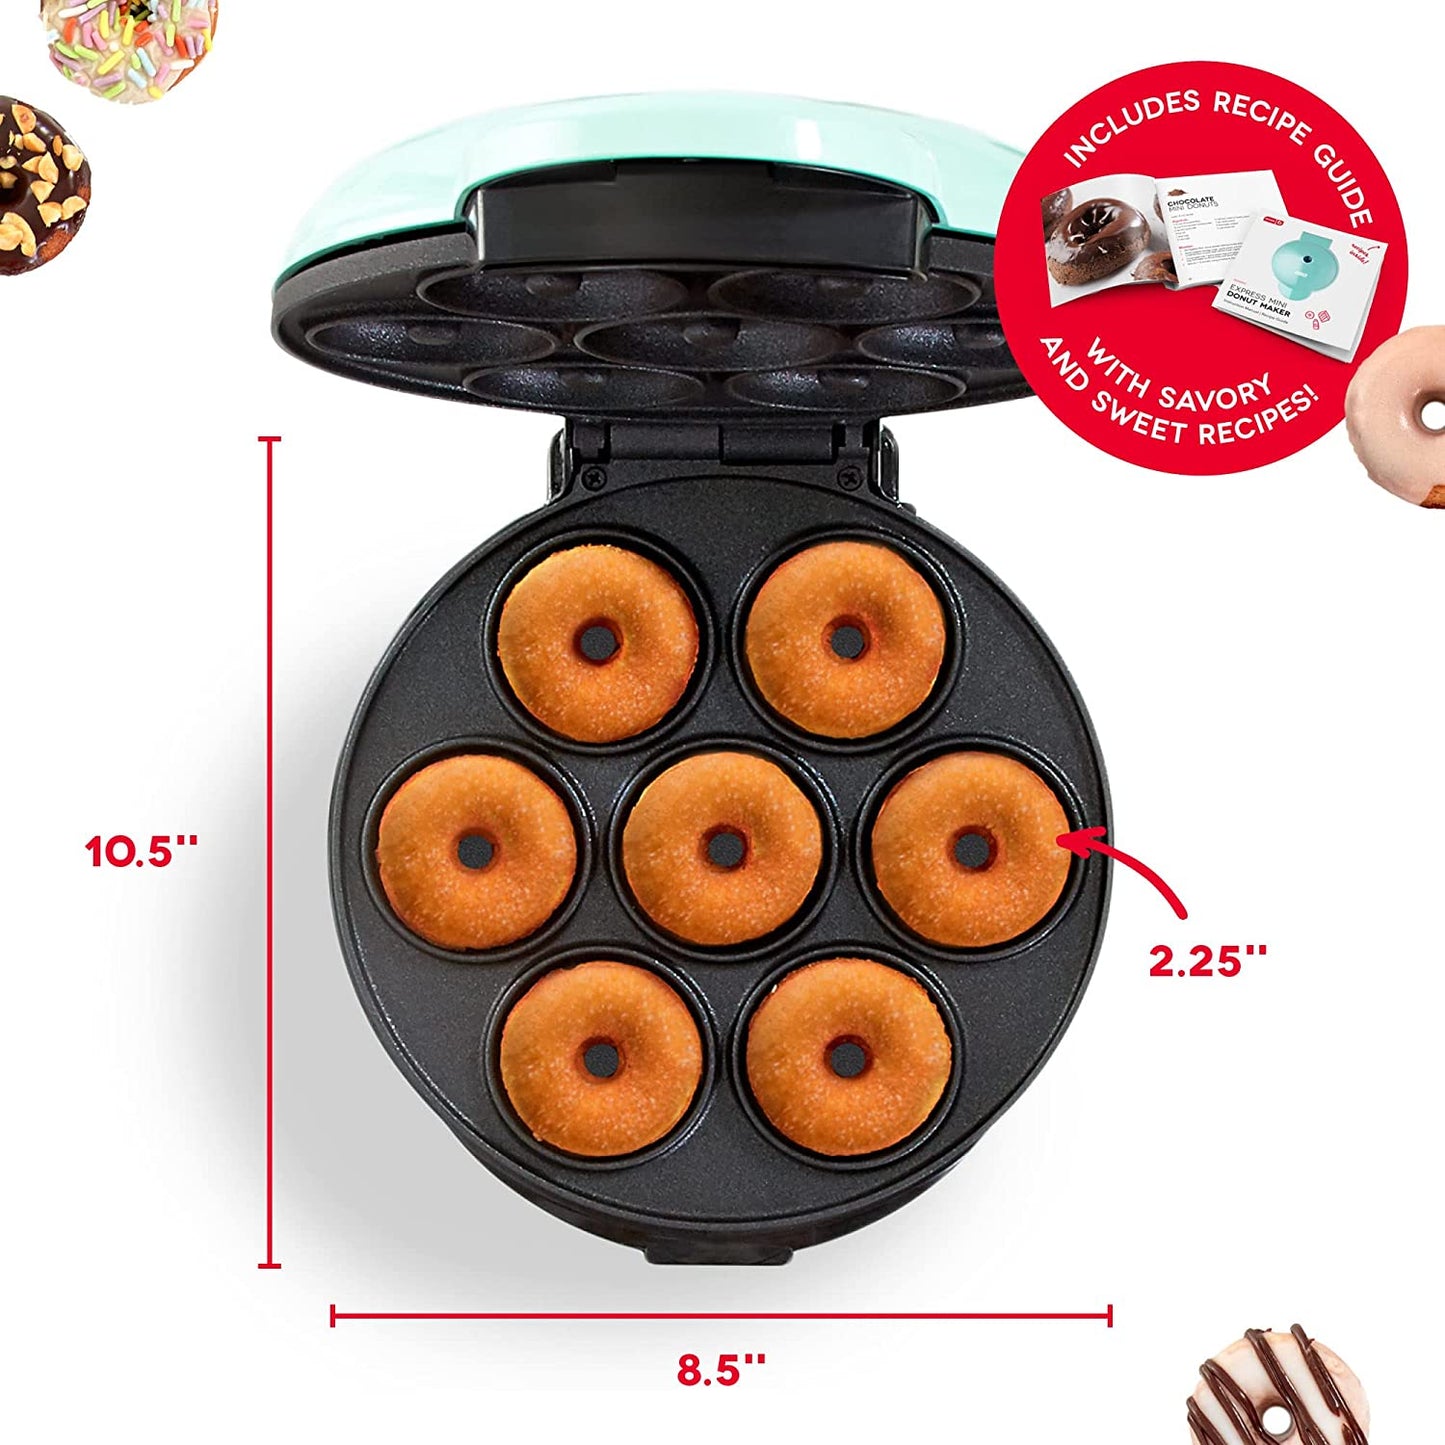 Size measurements for a mini donut maker. It measures 10.5 inches in length and 8.5 inches in width.